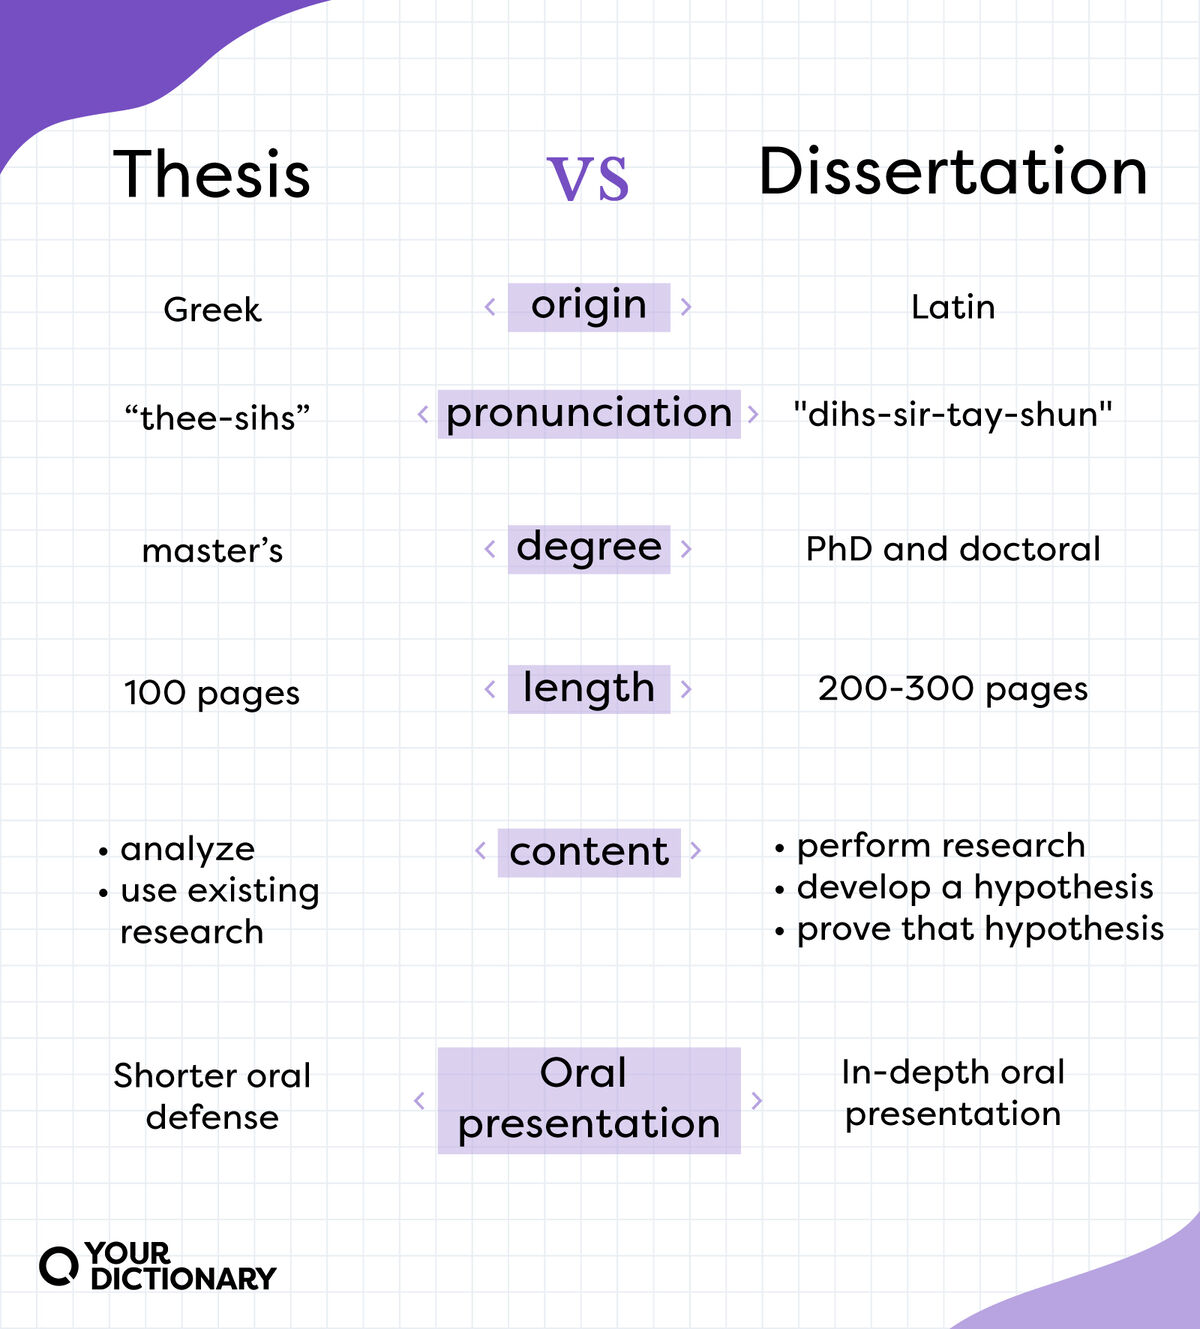 a dissertation is